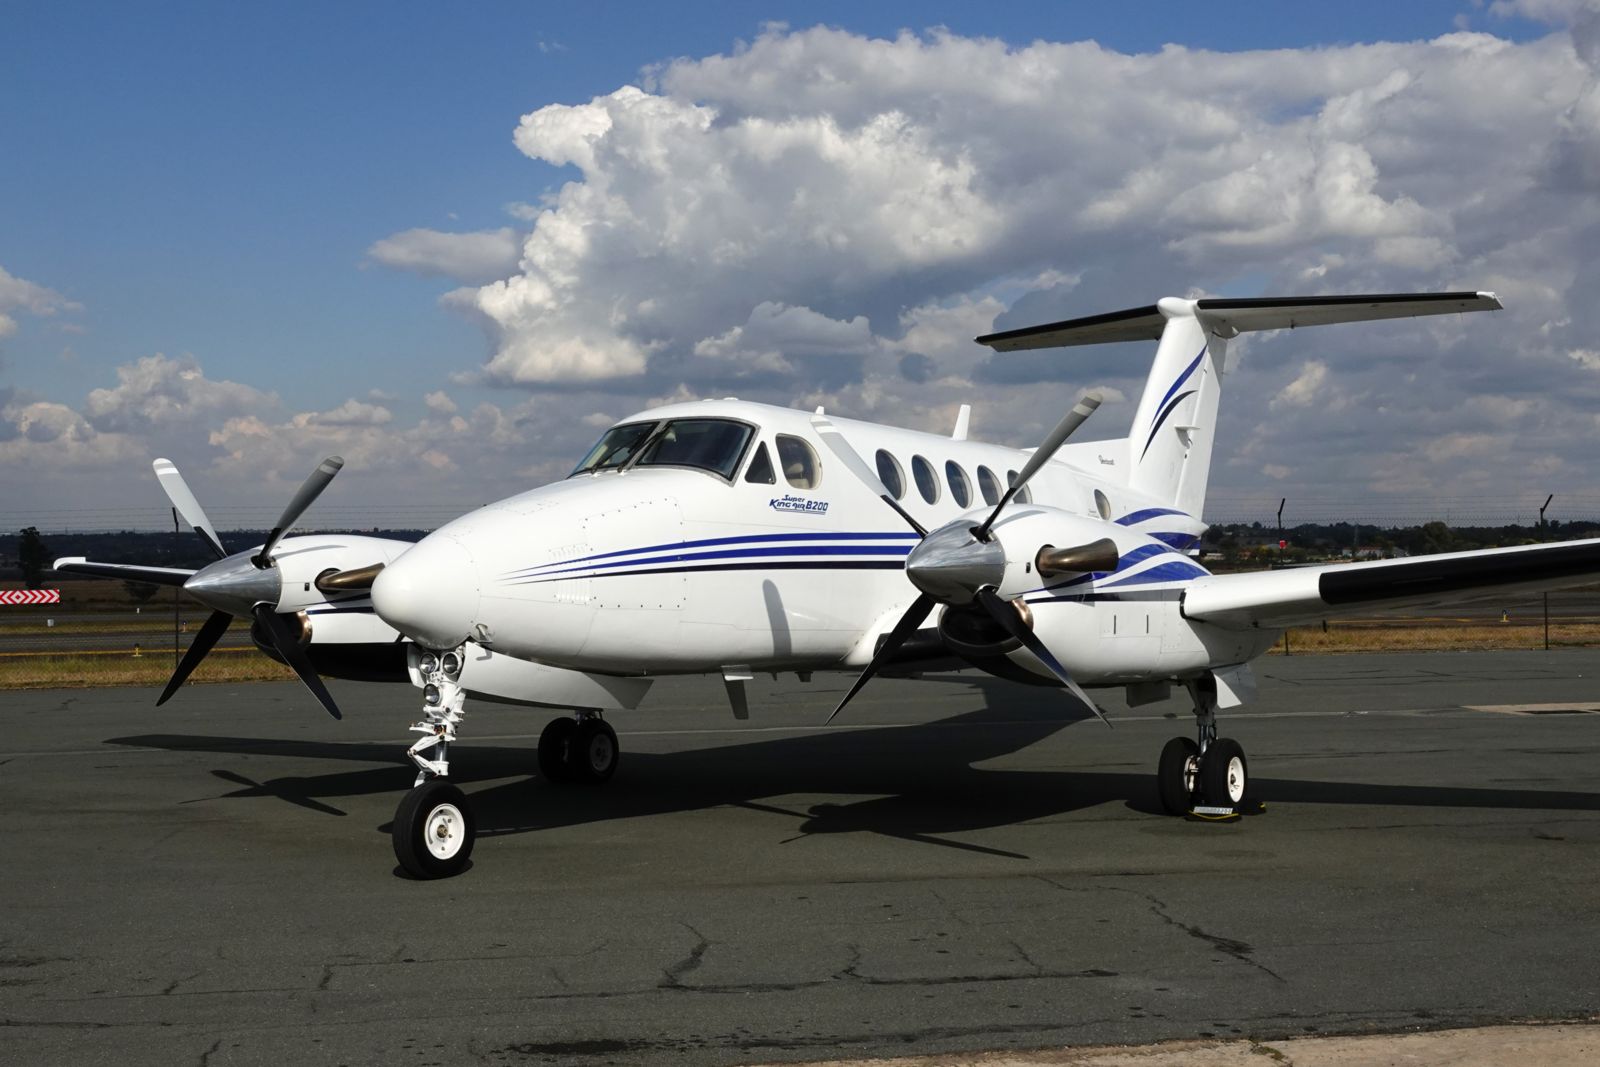 Beech King Air B200 gallery image /userfiles/files/bb1476%20exterior%20angles%20props.jpg